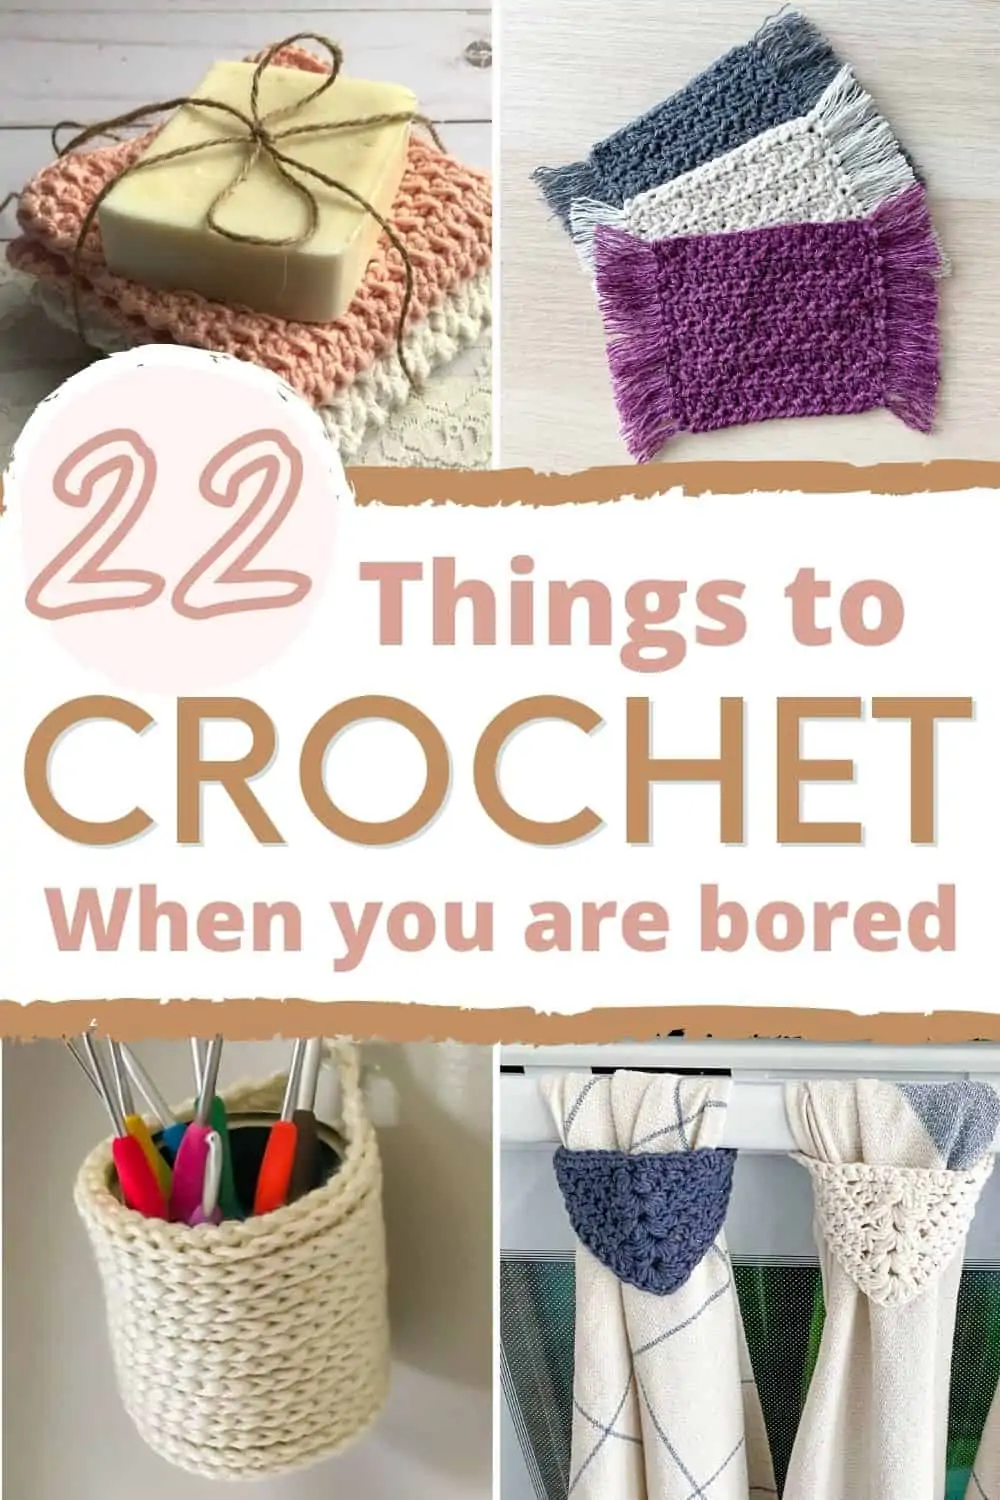 Has anyone used one of these? If so are they useful? : r/crochet